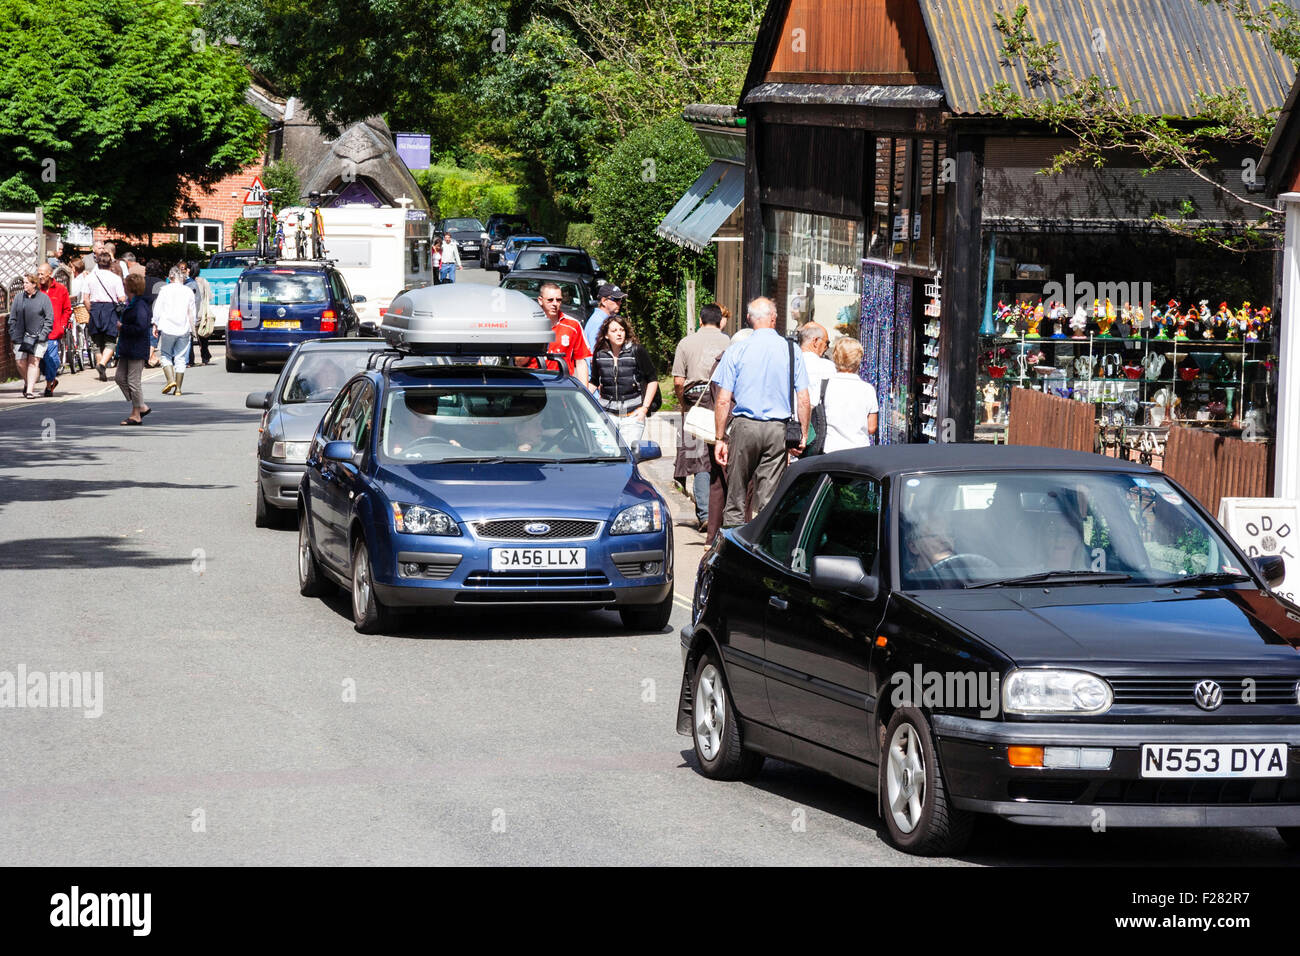 England, New Forest, Town of Burley. View along busy street with tourists on pavement and line of cars stuck in summer traffic congestion. Stock Photo